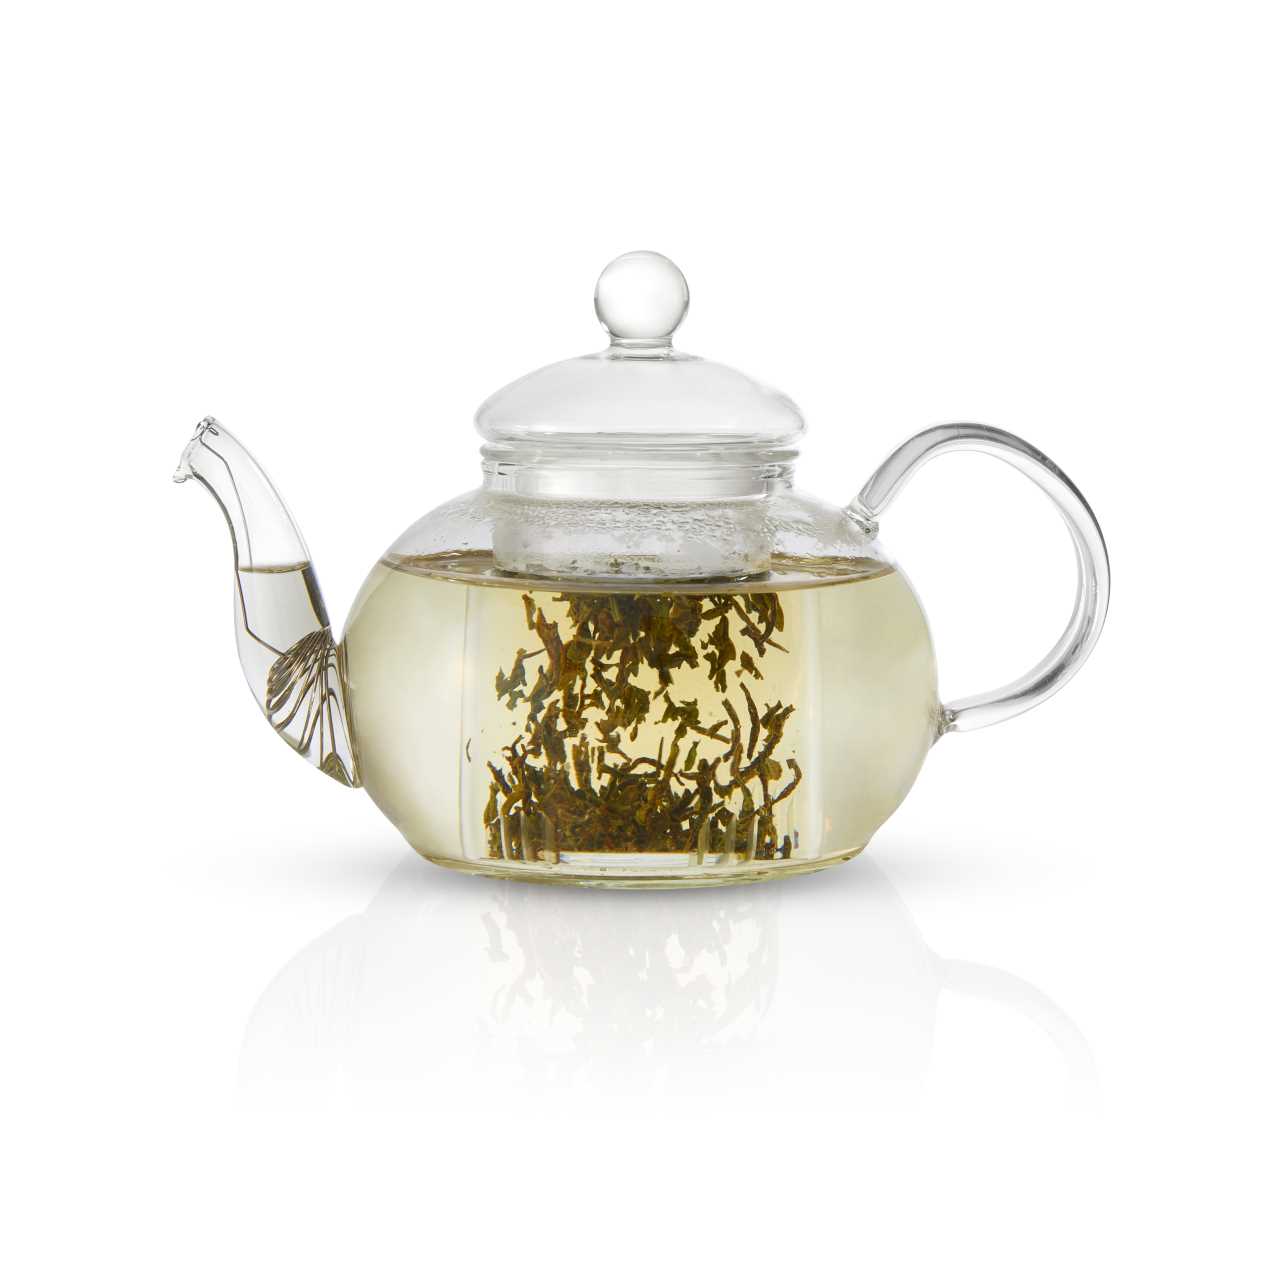 Classic Glass Teapot With Infuser - 800ml with loose leaf tea brewed